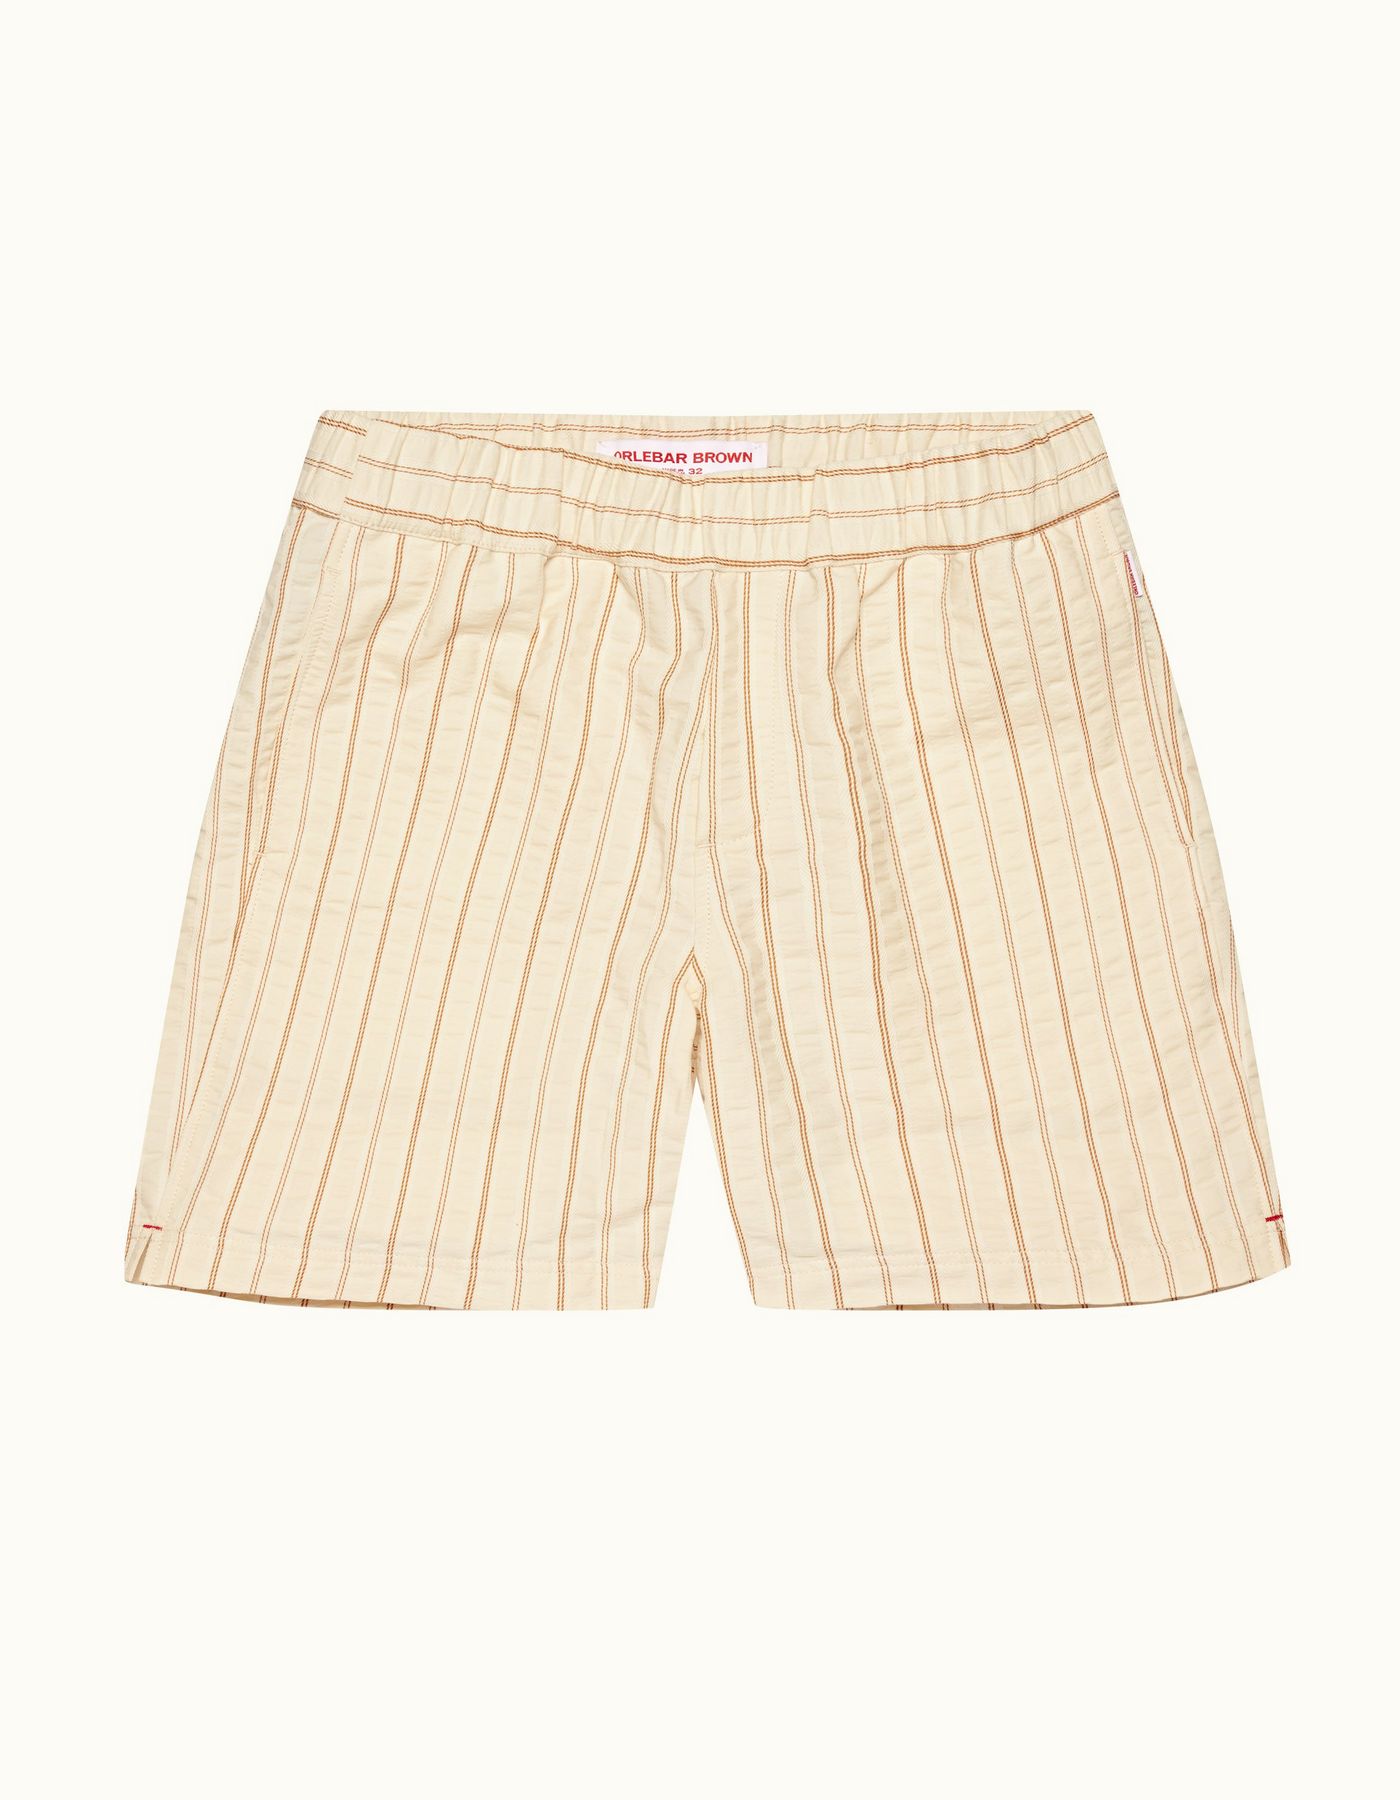 Louis - Mens White Sand Relaxed Fit Textured Stripe Drawcord Shorts